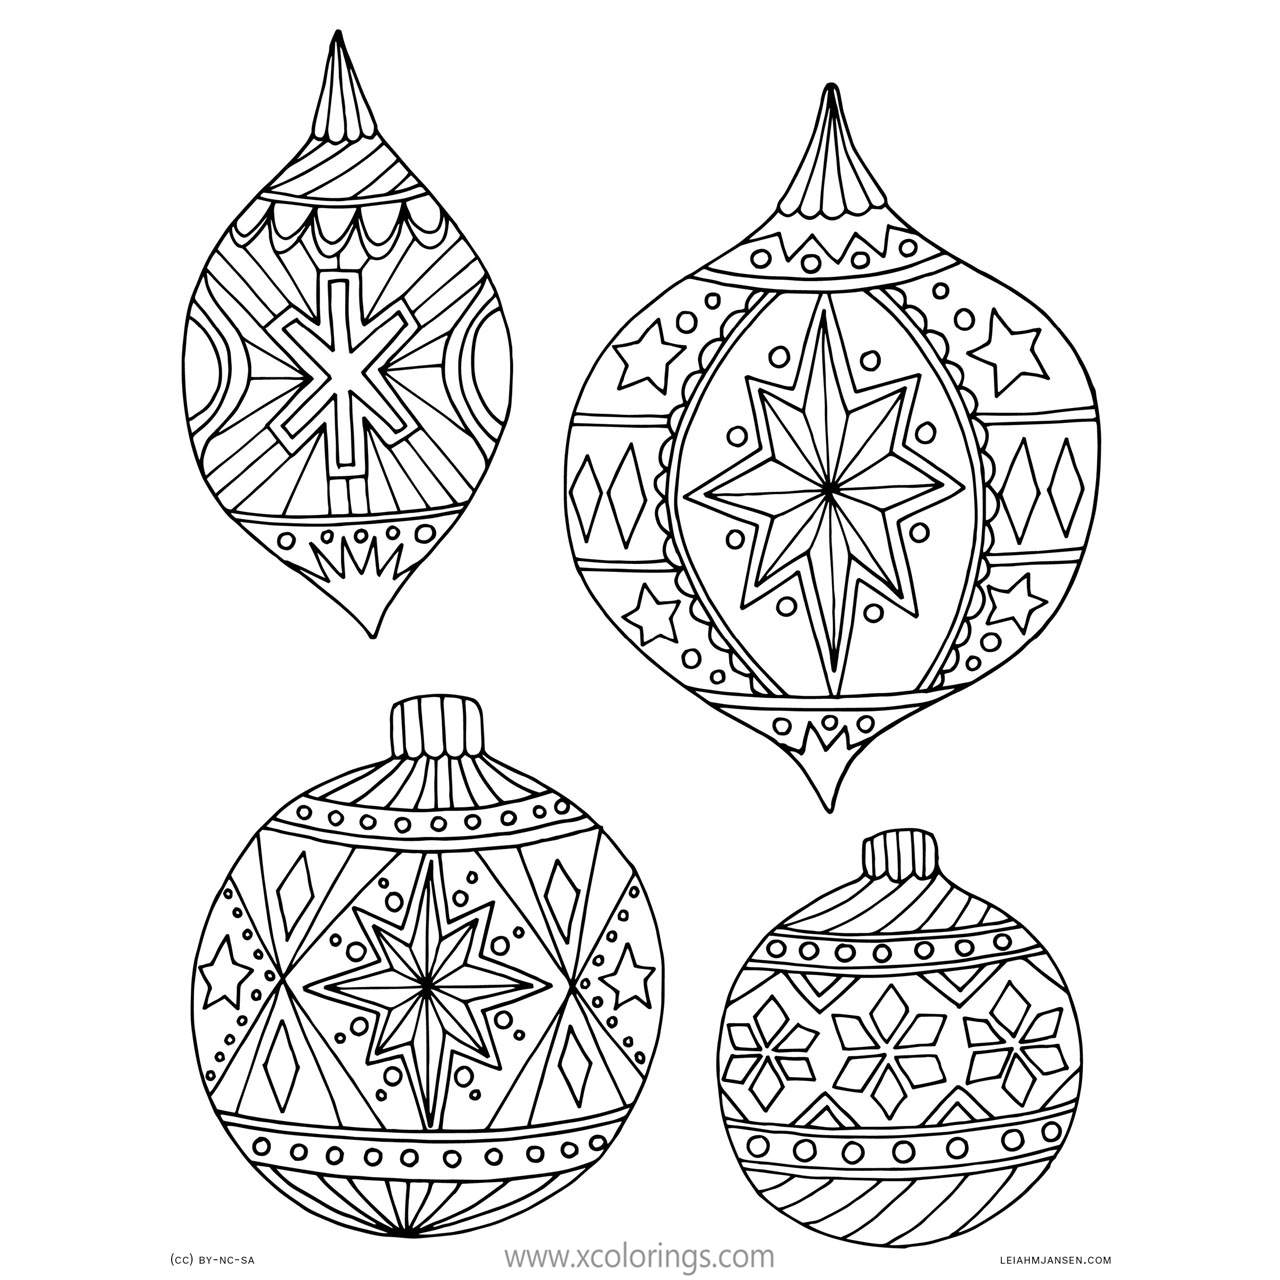 Free Traditional Christmas Ornaments Coloring Pages printable